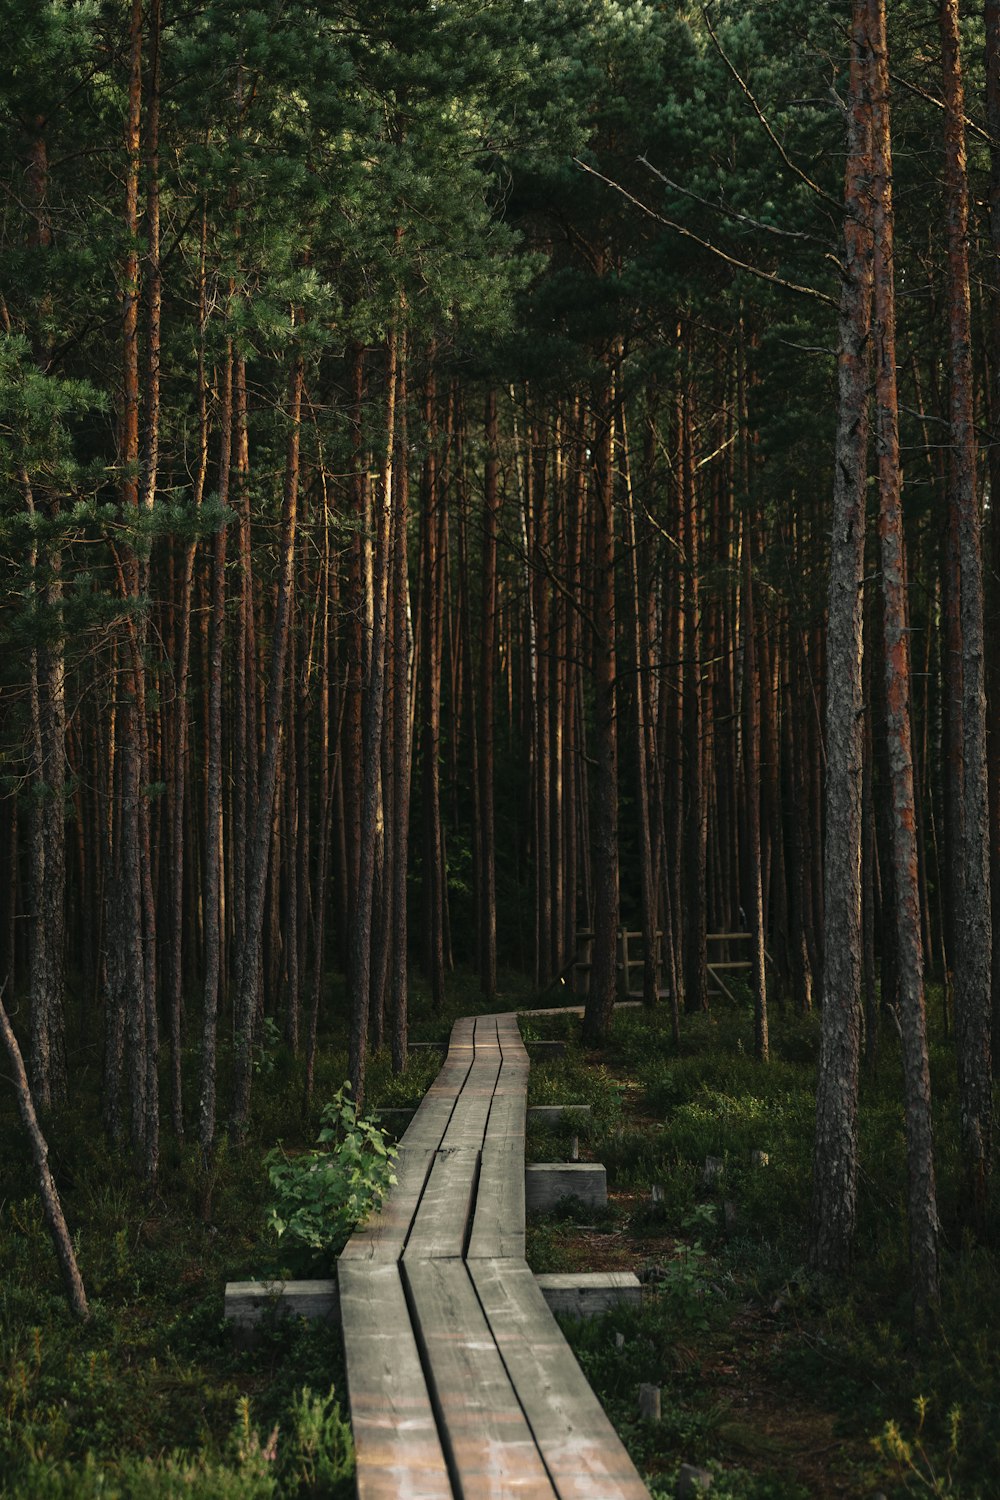 brown wooden pathway in the middle of green trees